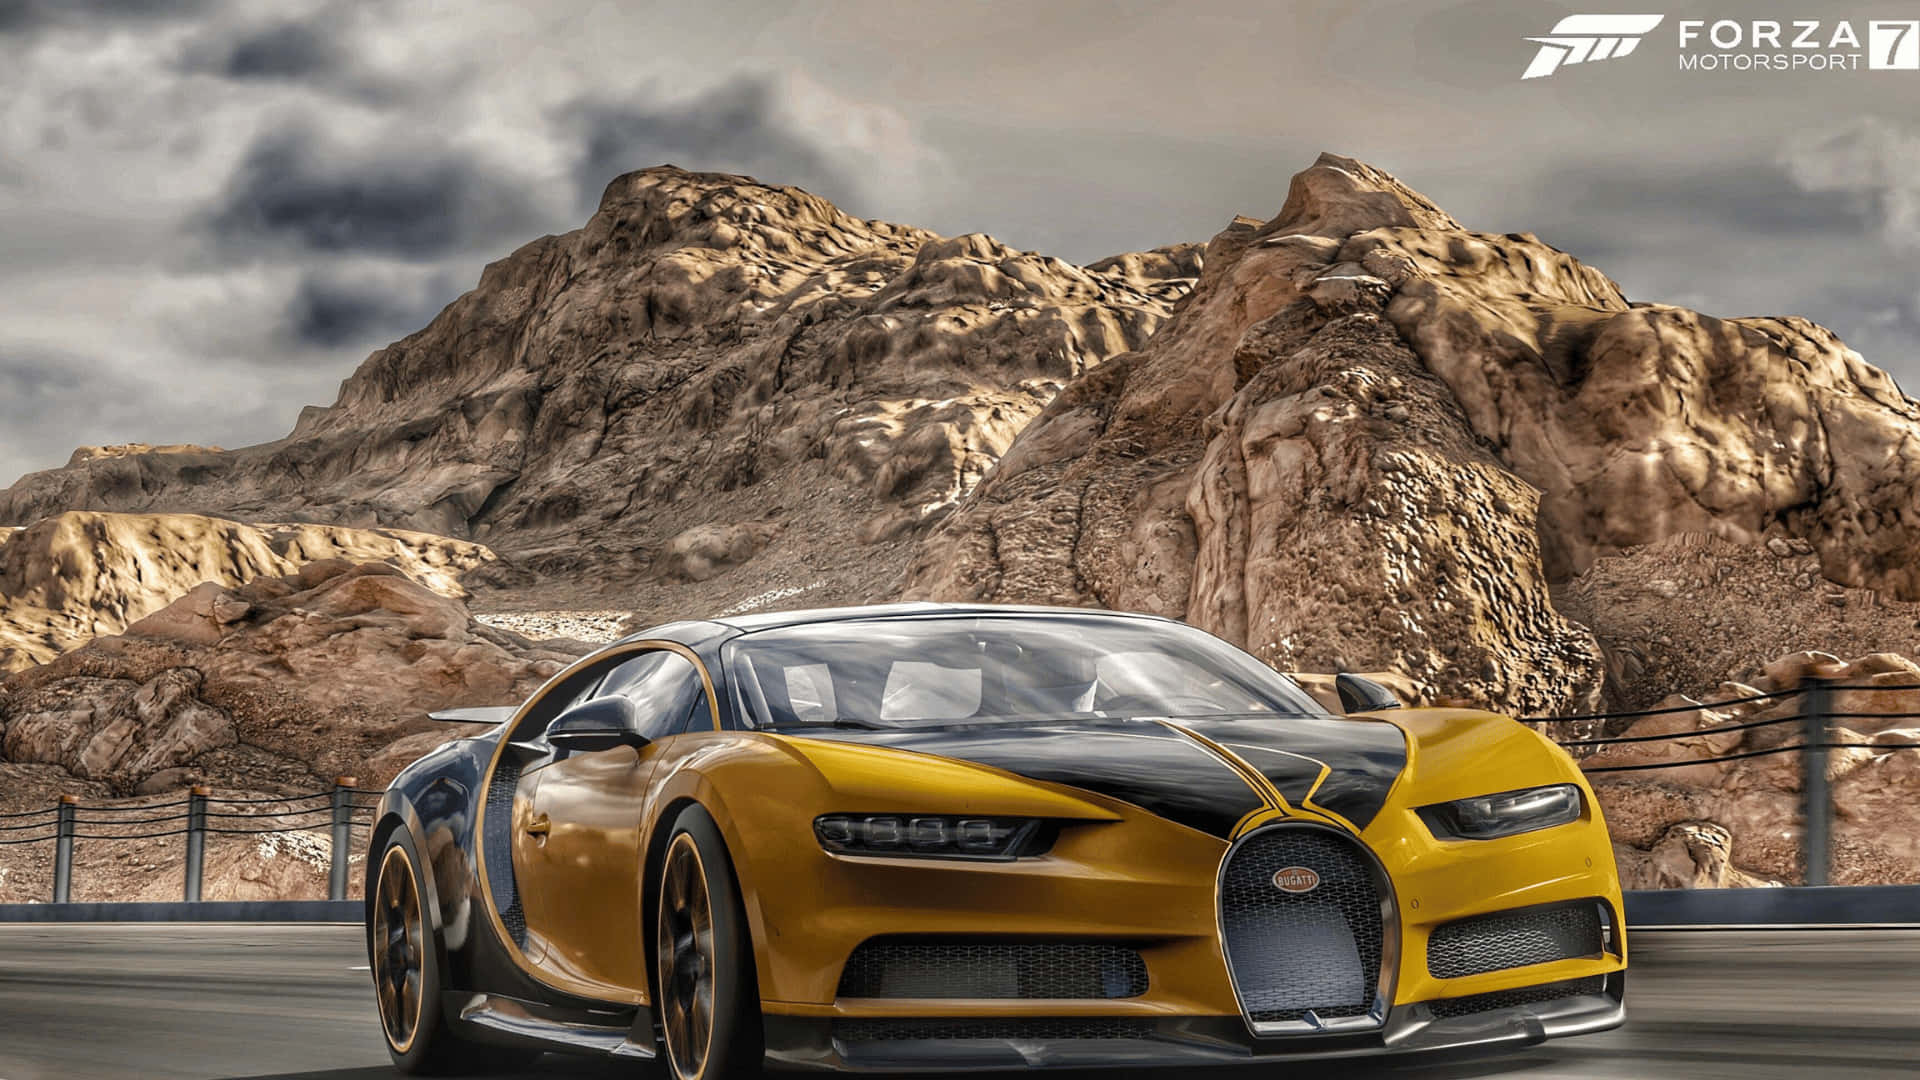 The Bugatti Chiron Is Driving Down A Road